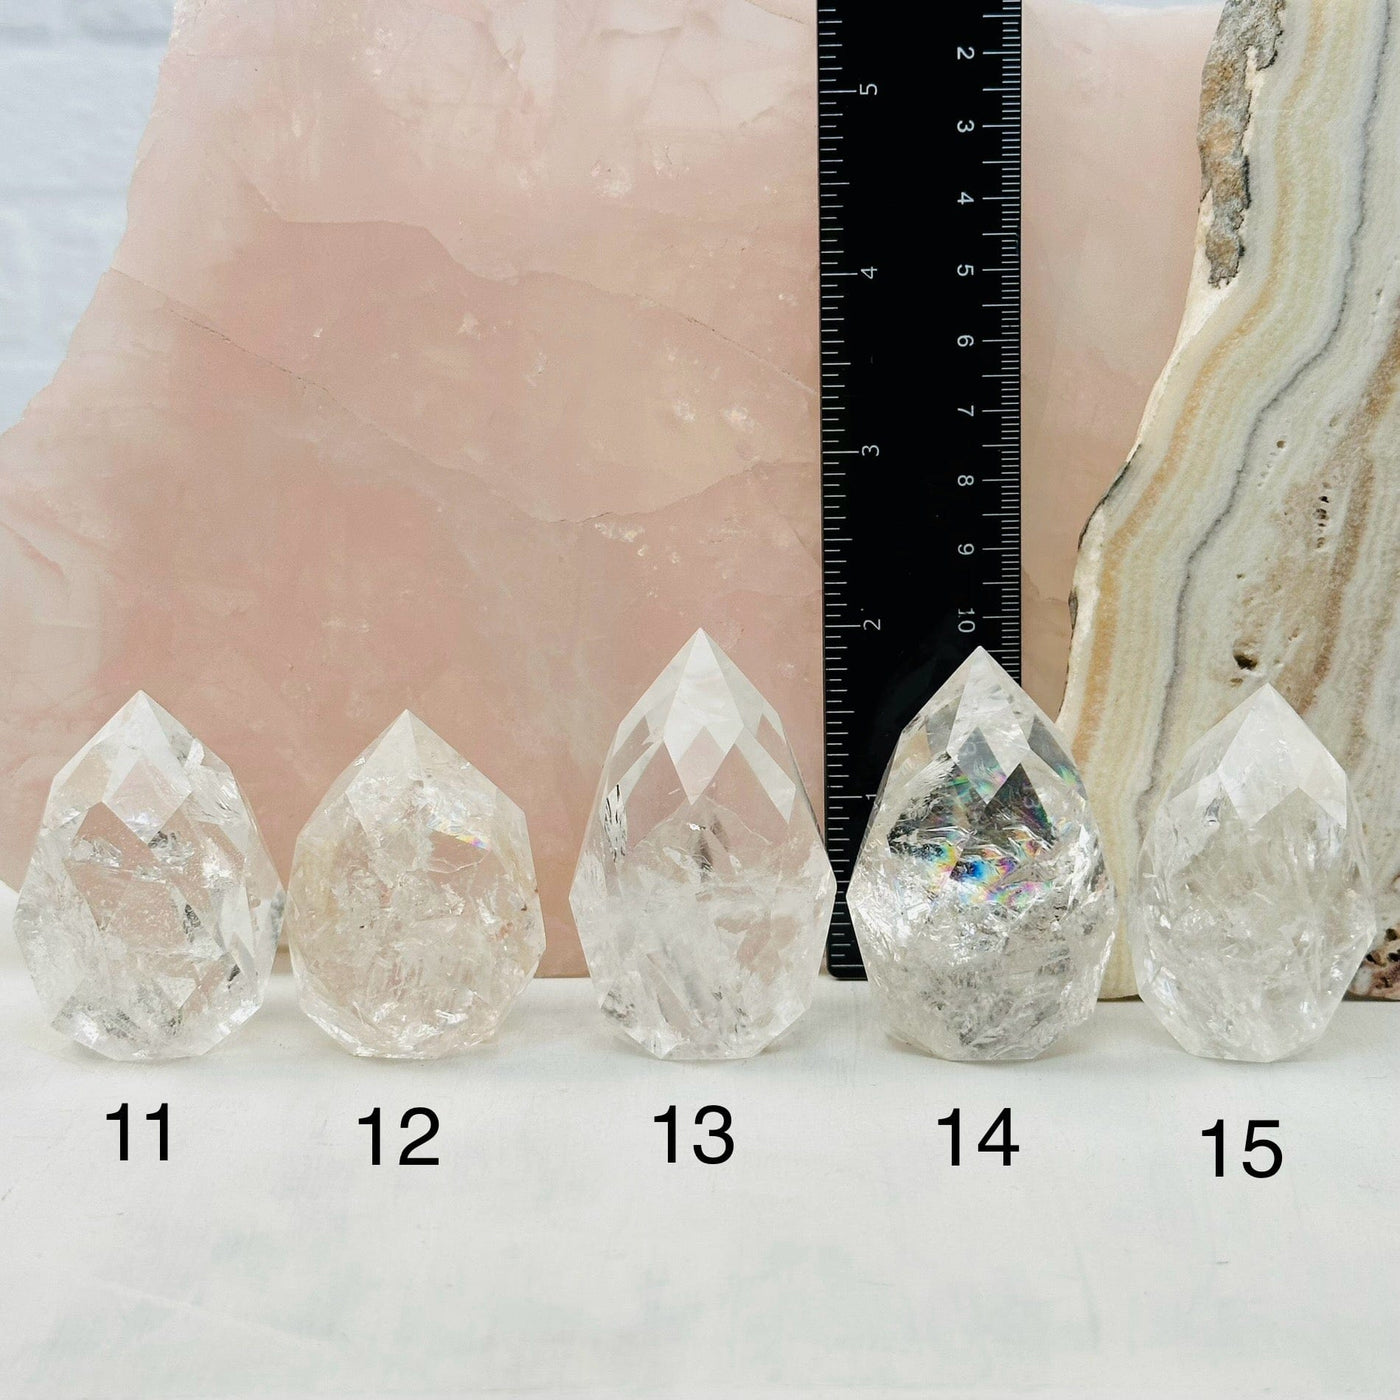 Faceted Clear Quartz Crystal Egg Point - You Choose - next to a ruler for size reference